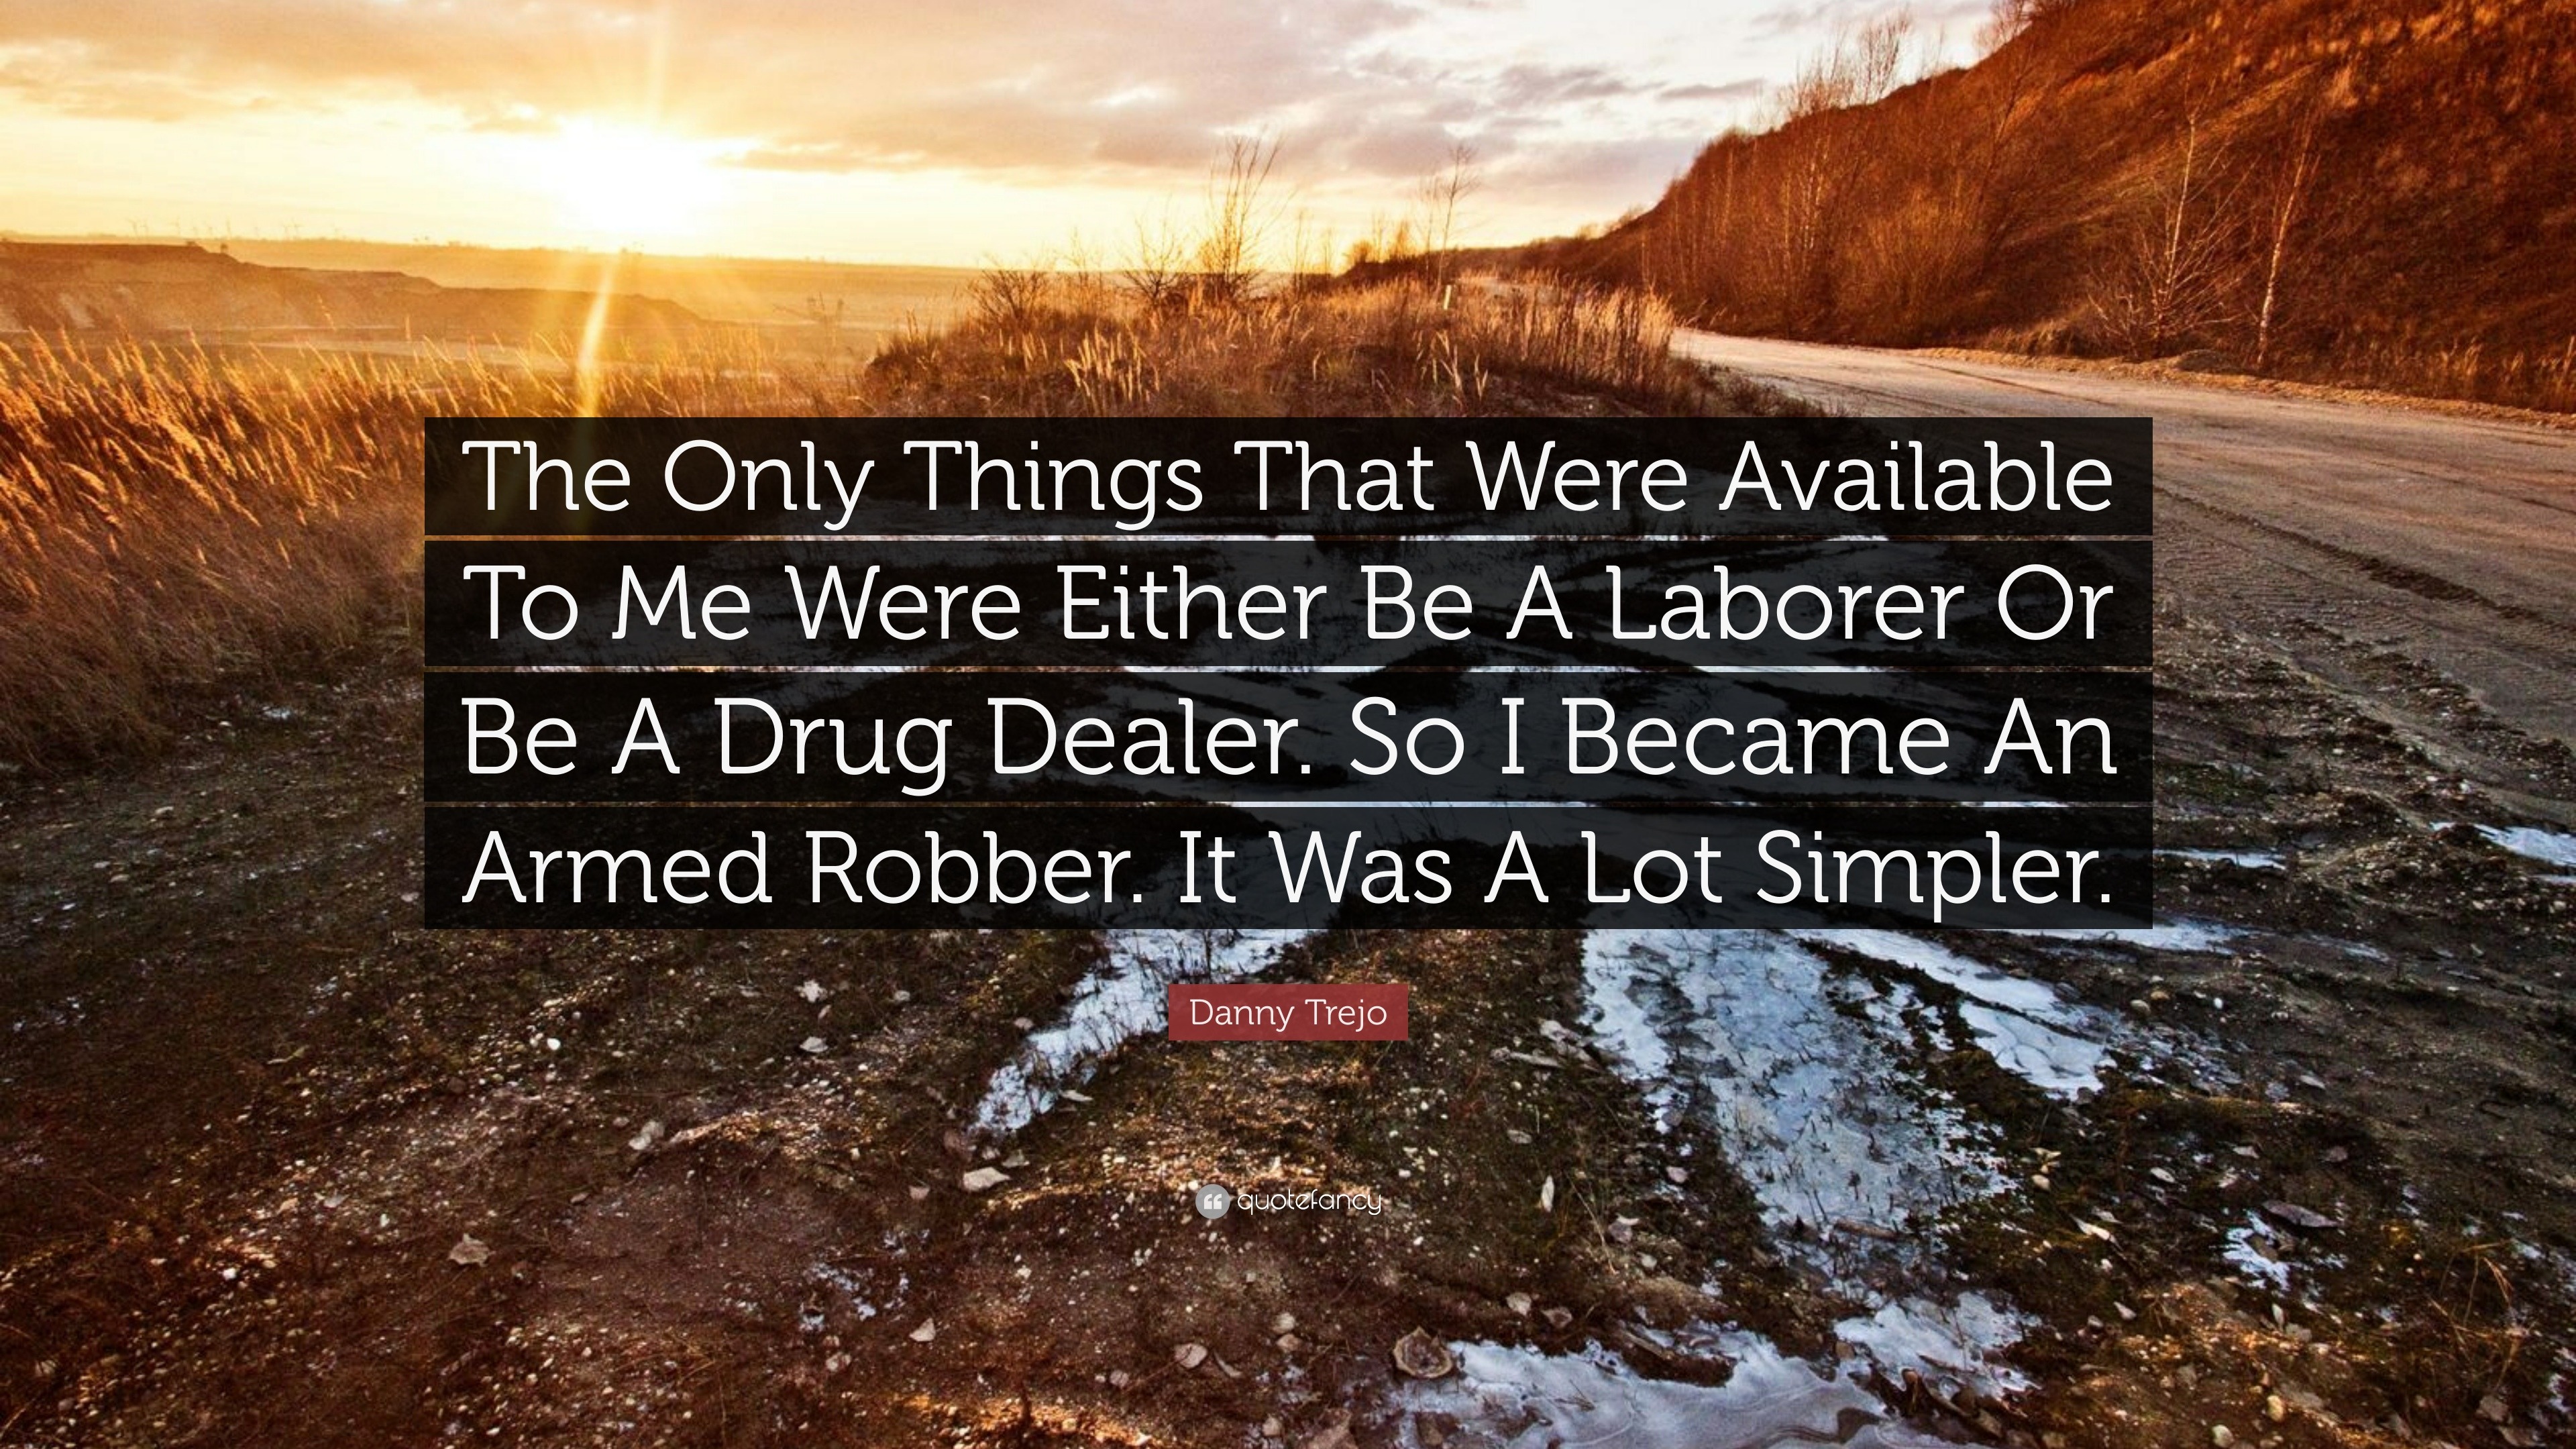 Danny Trejo Quote: “The Only Things That Were Available To Me Were ...